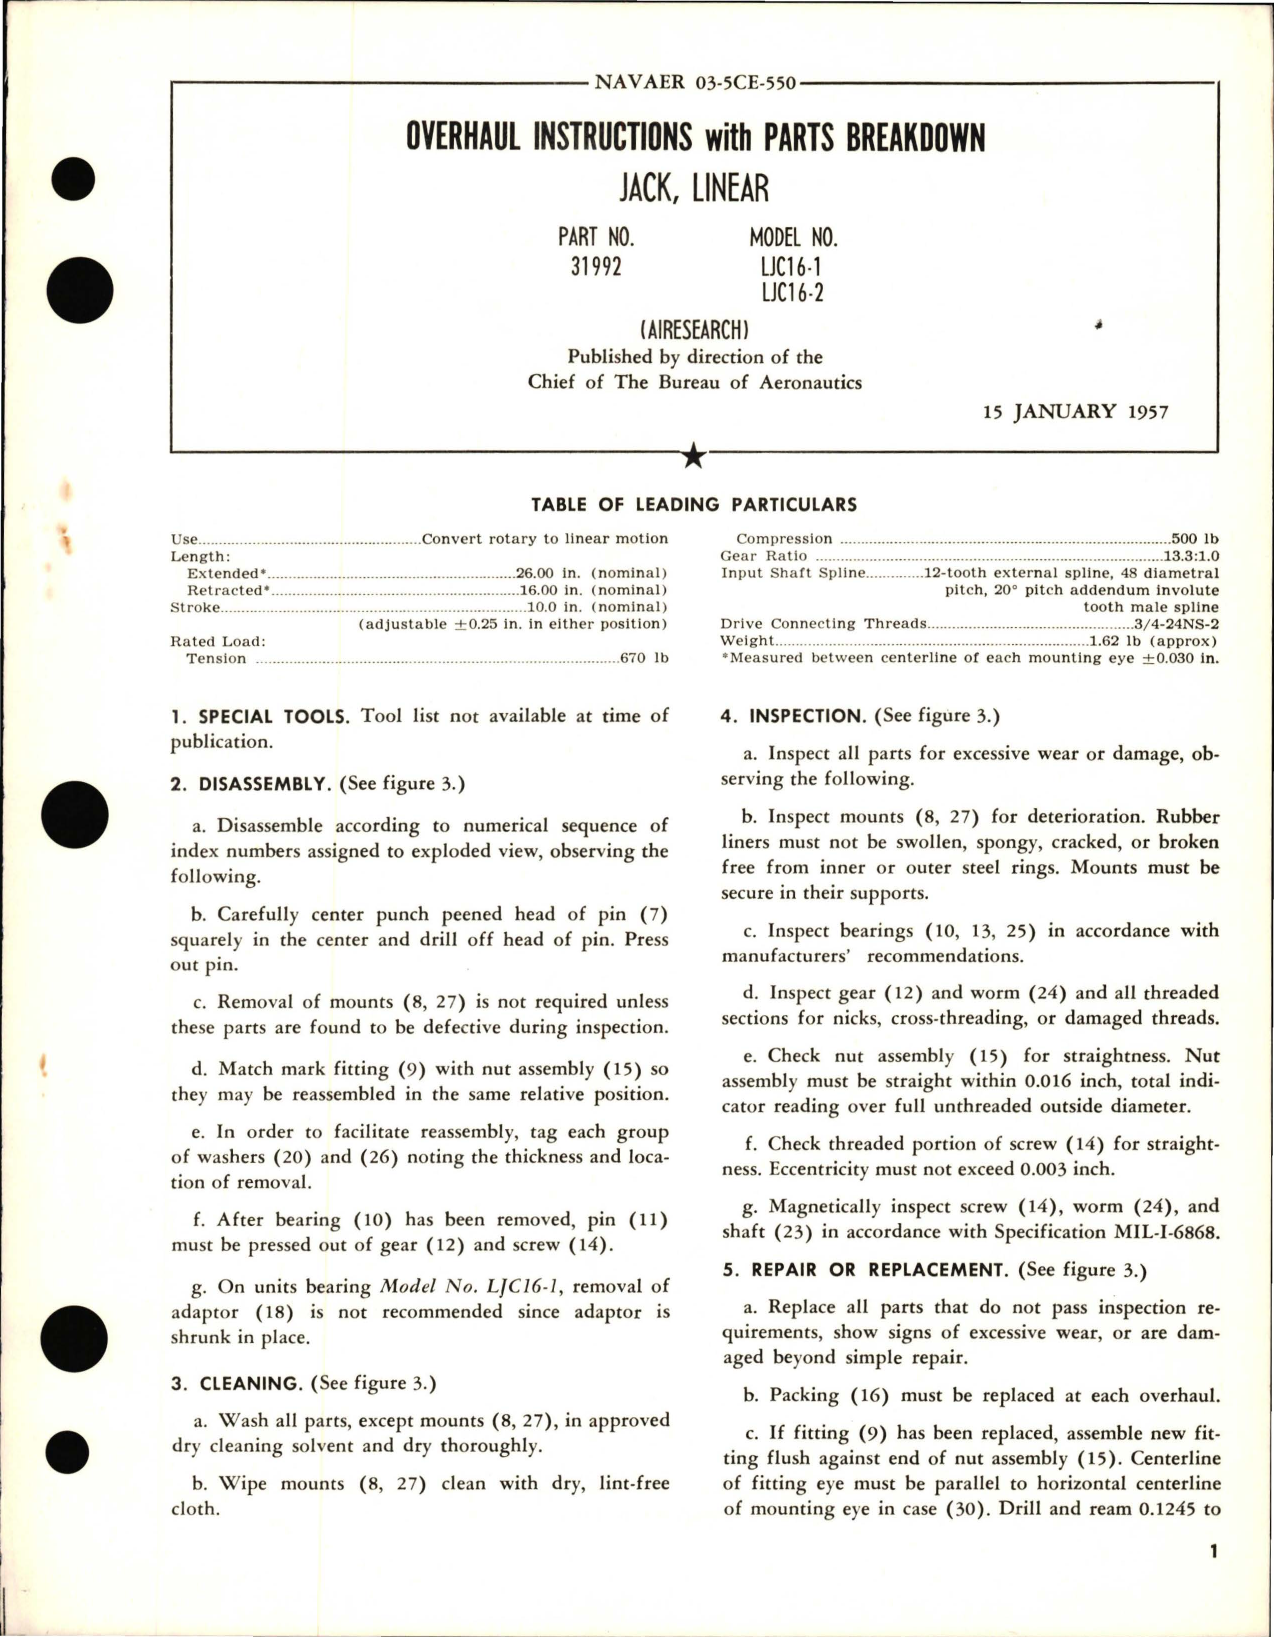 Sample page 1 from AirCorps Library document: Overhaul Instructions with Parts Breakdown for Linear Jack - Part 31992 - Model LJC16-1 and LJC16-2